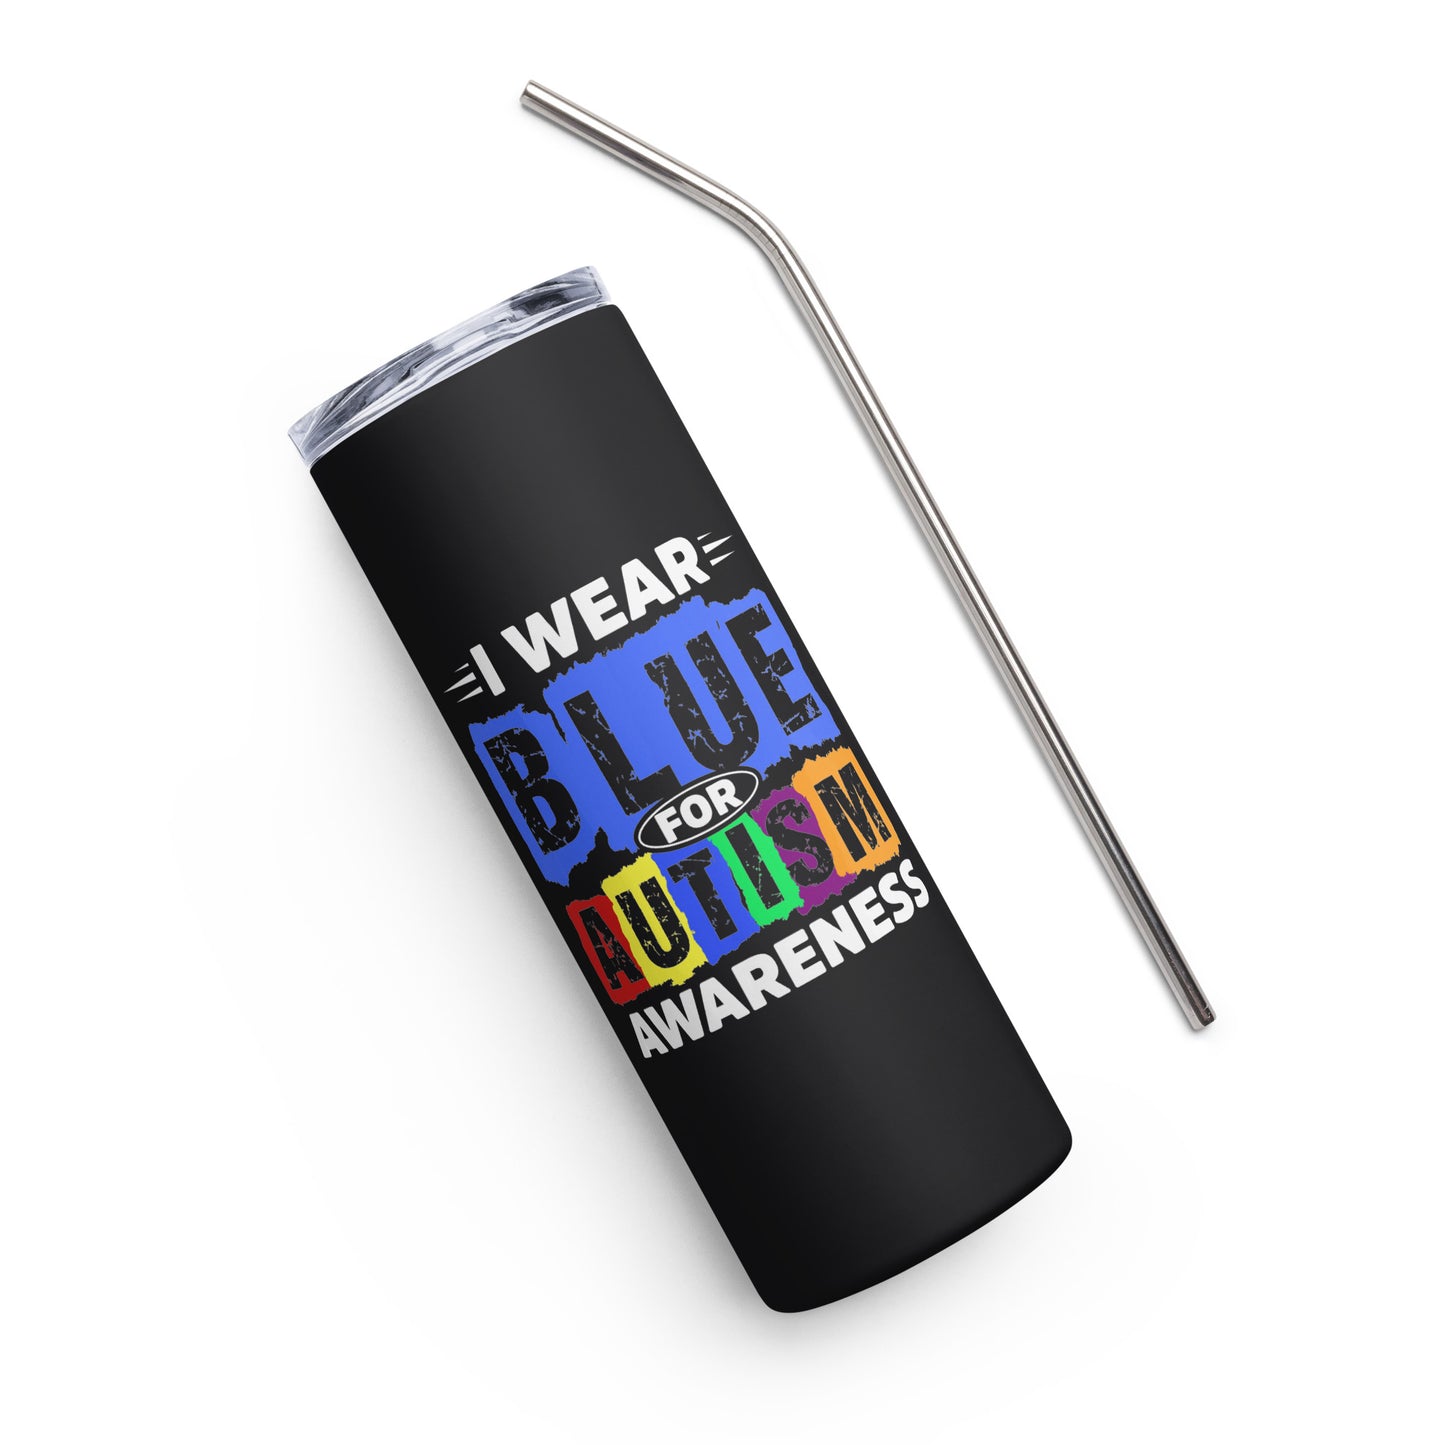 I Wear Blue for Autism Awareness Stainless steel tumbler